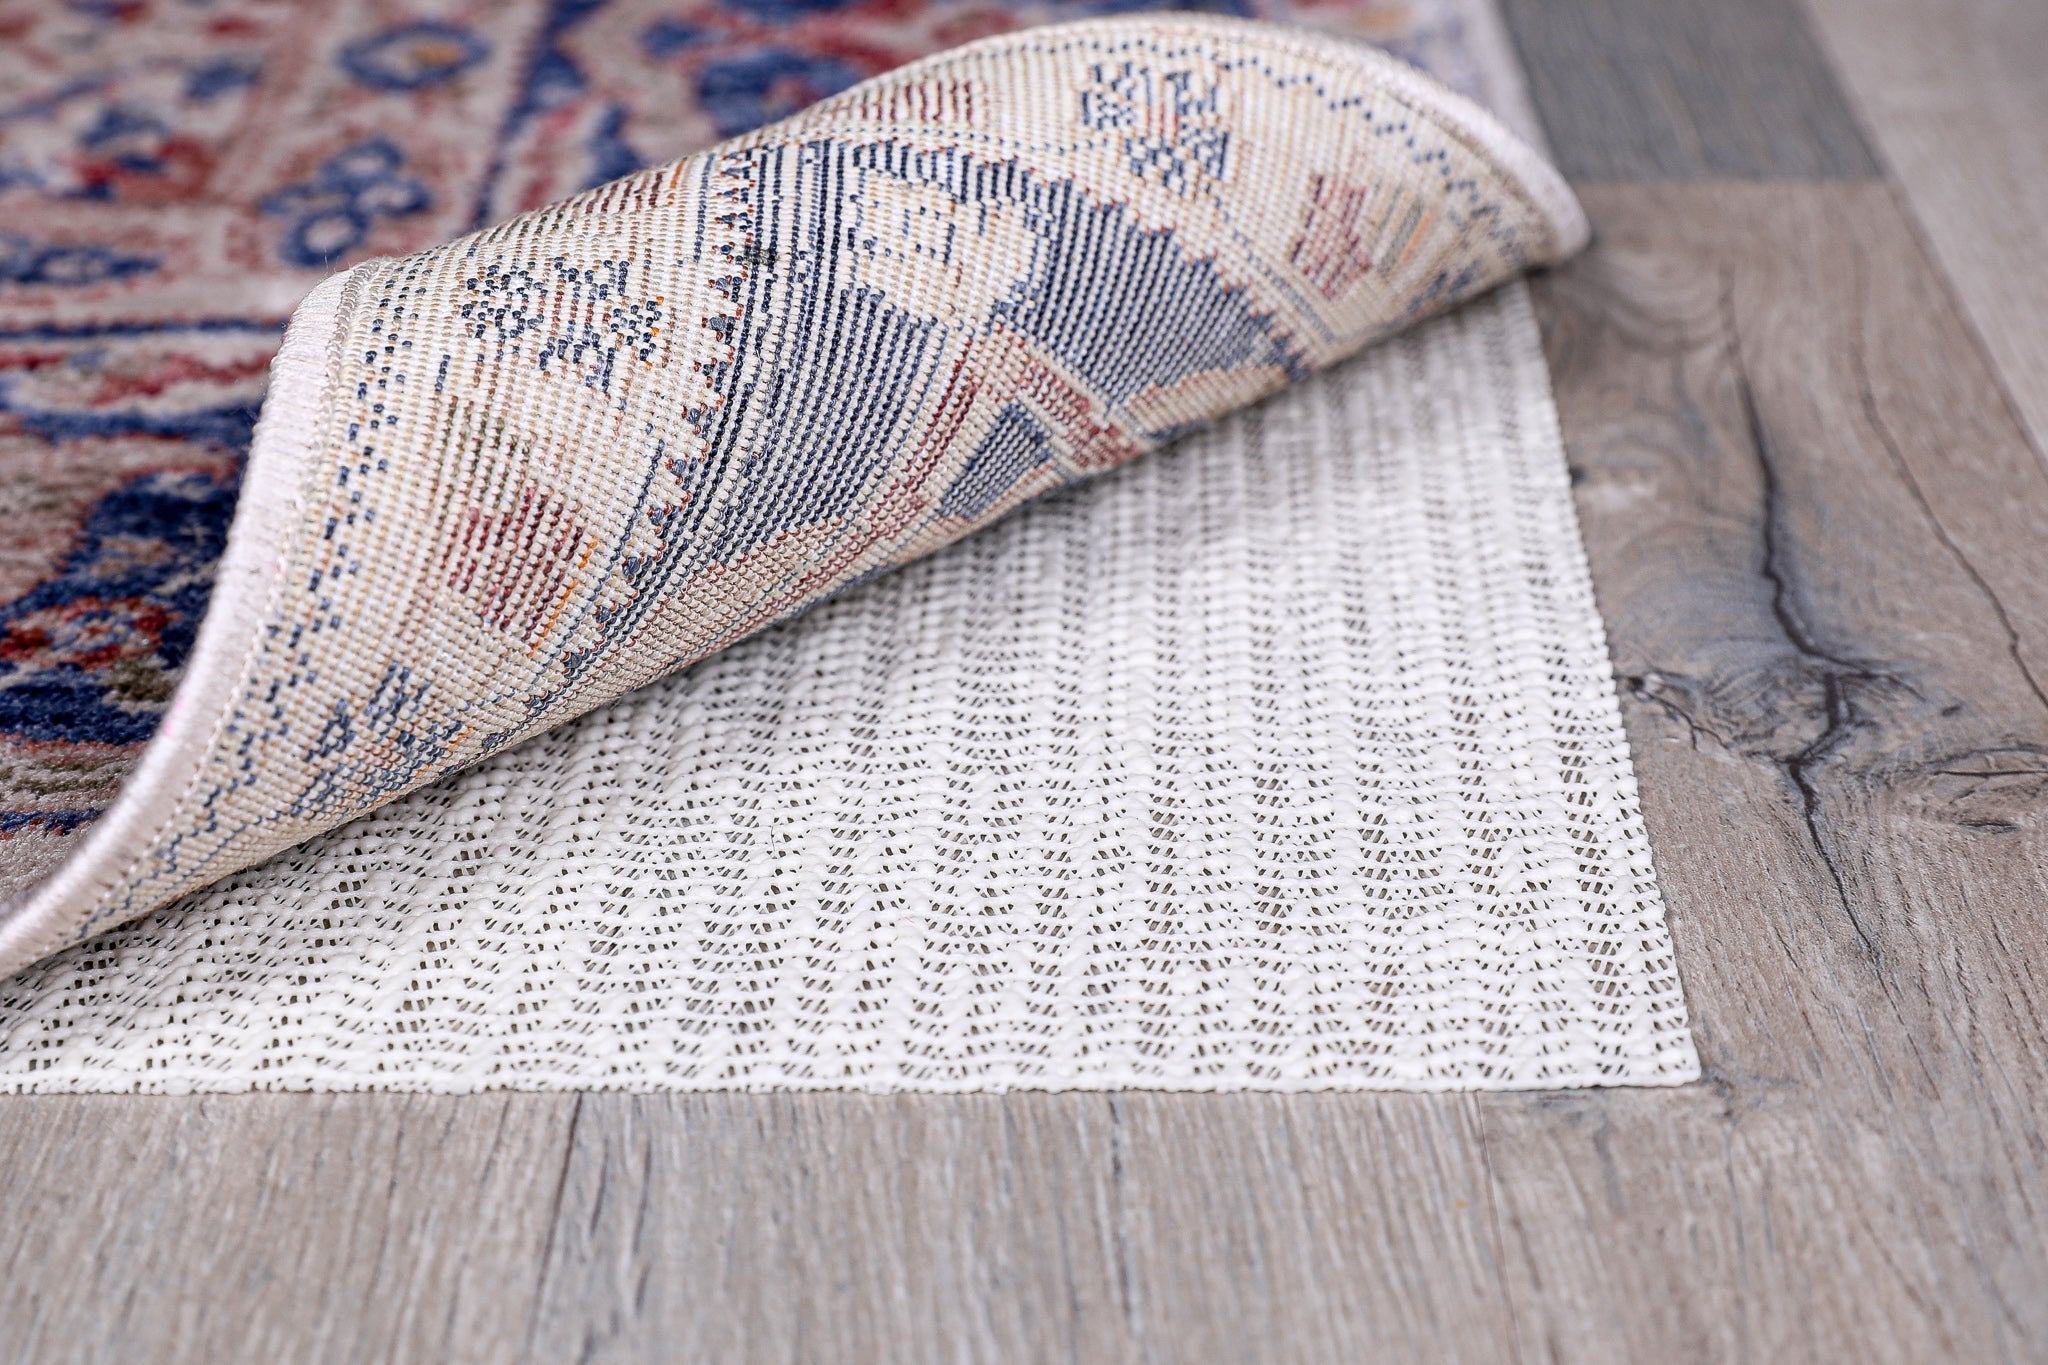 This Non-Slip Rug Pad Gripper Keeps Rugs in Place When Vacuuming